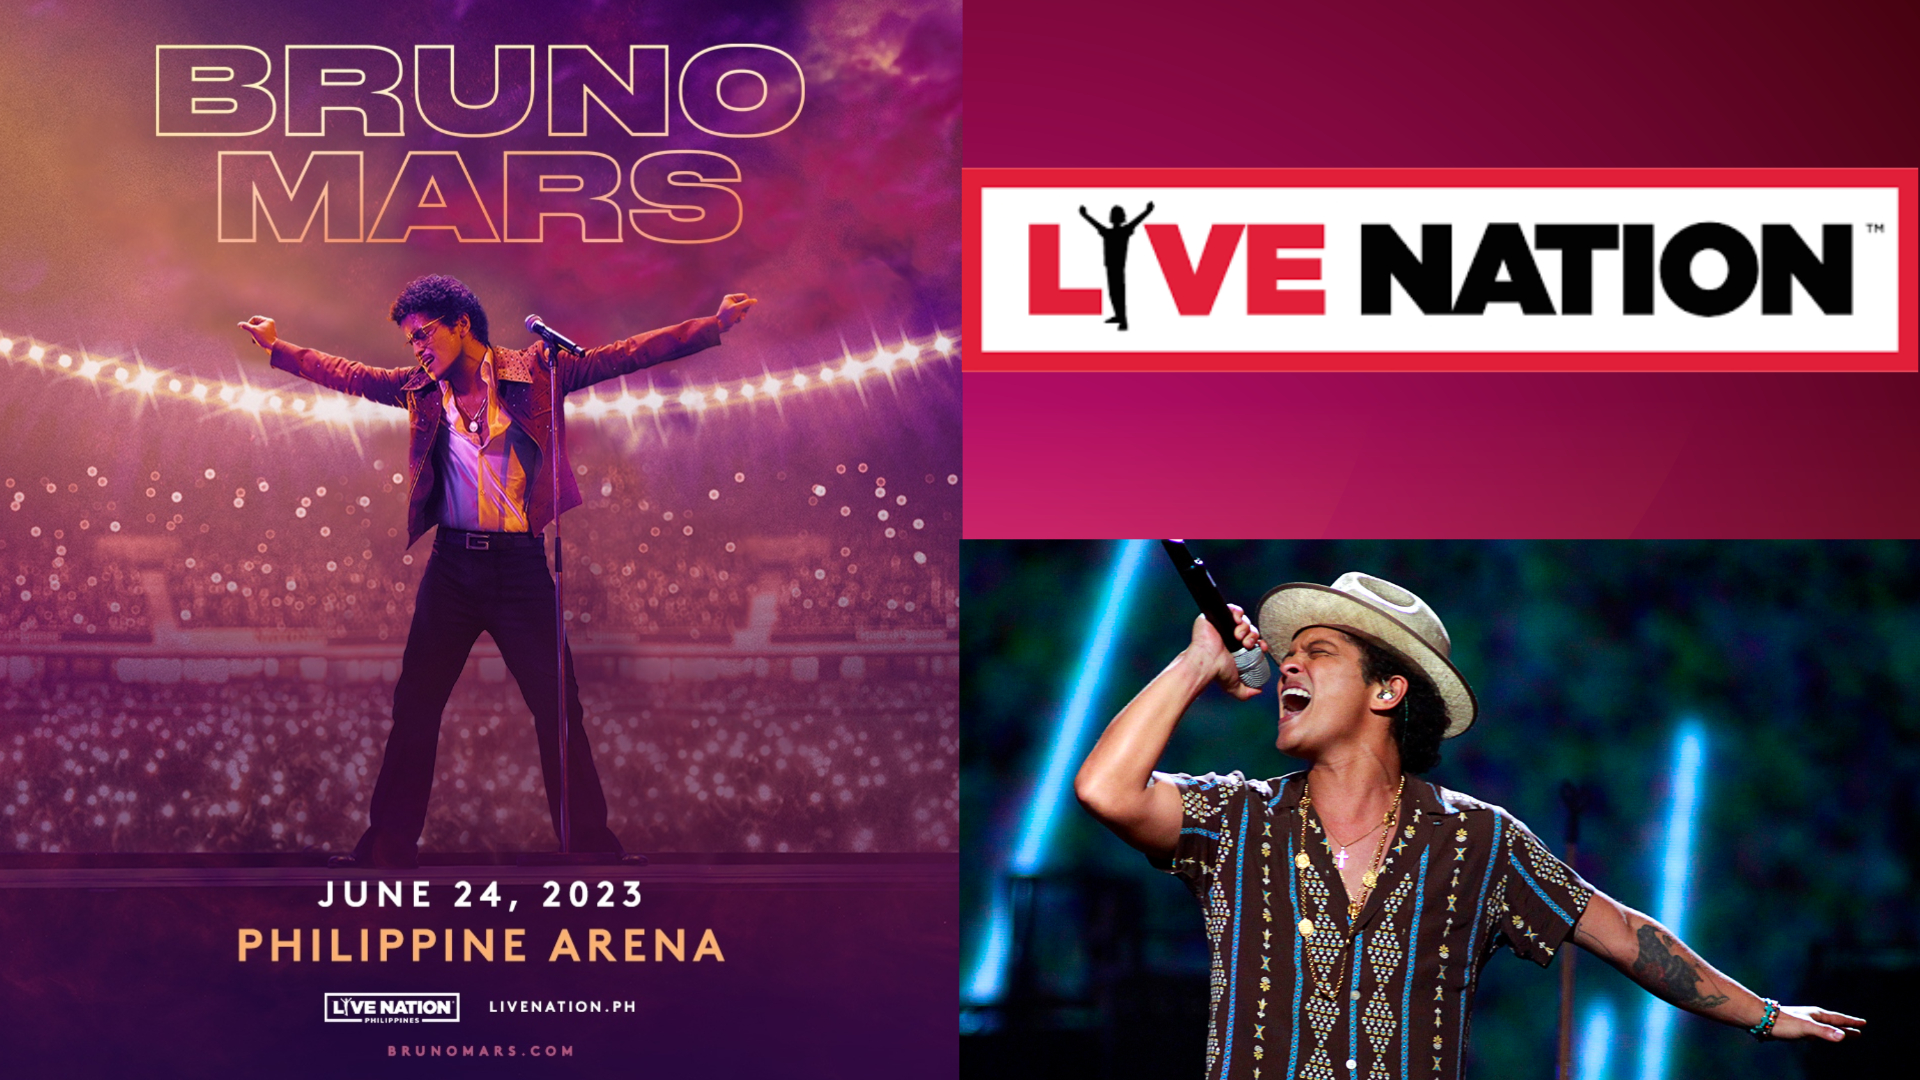 Bruno Mars Concert | Live Stream, Date, Location and Tickets info